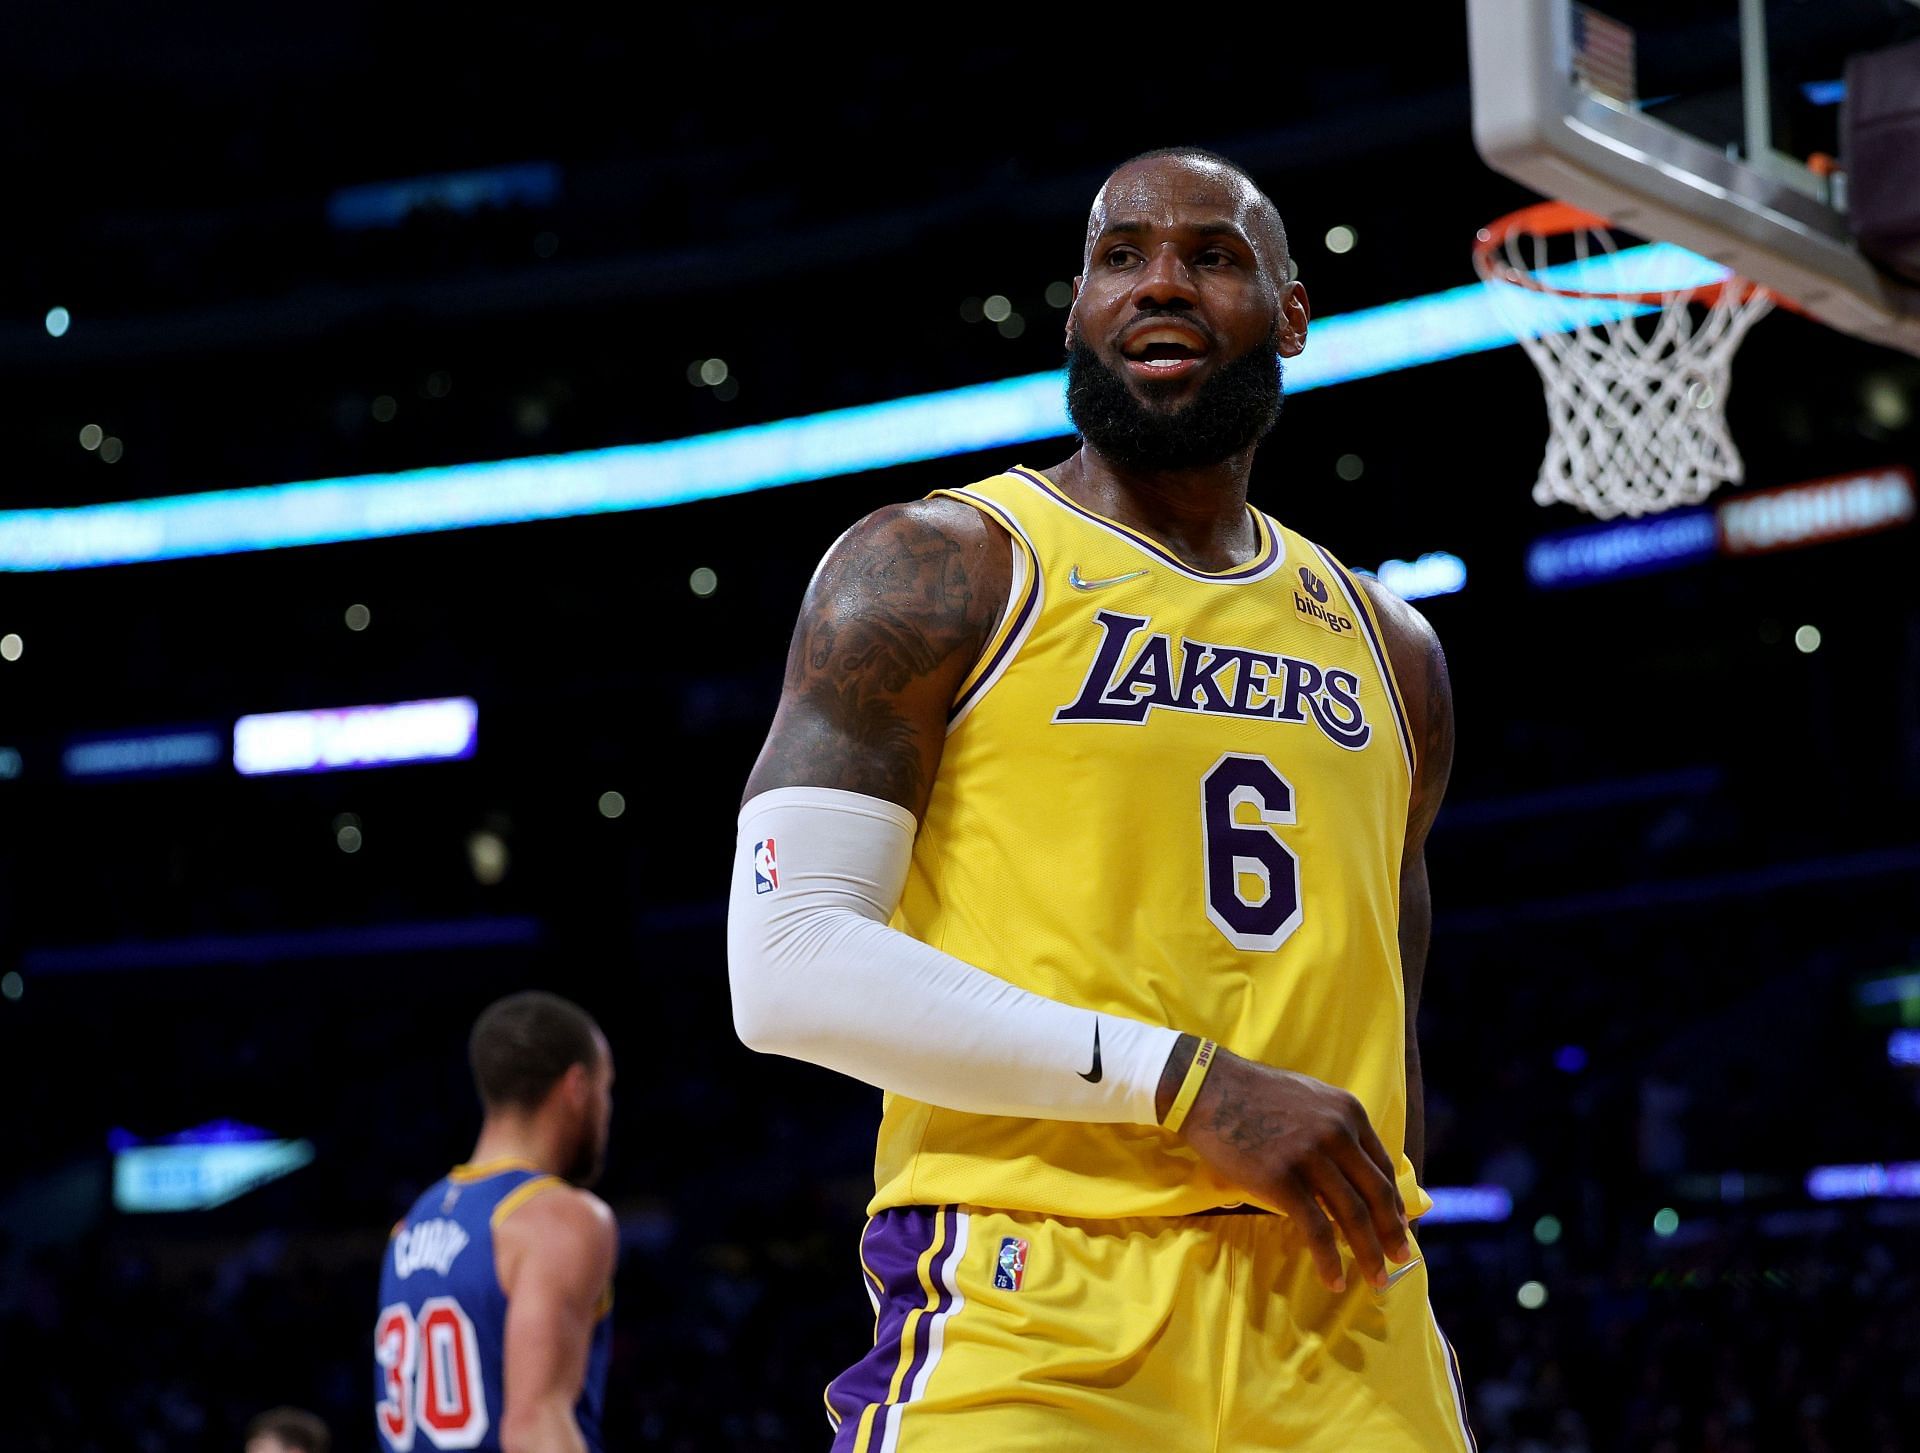 LeBron James of the LA Lakers reacts after his basket and Golden State Warriors foul during a 124-116 Lakers win at Crypto.com Arena on Saturday in Los Angeles, California.